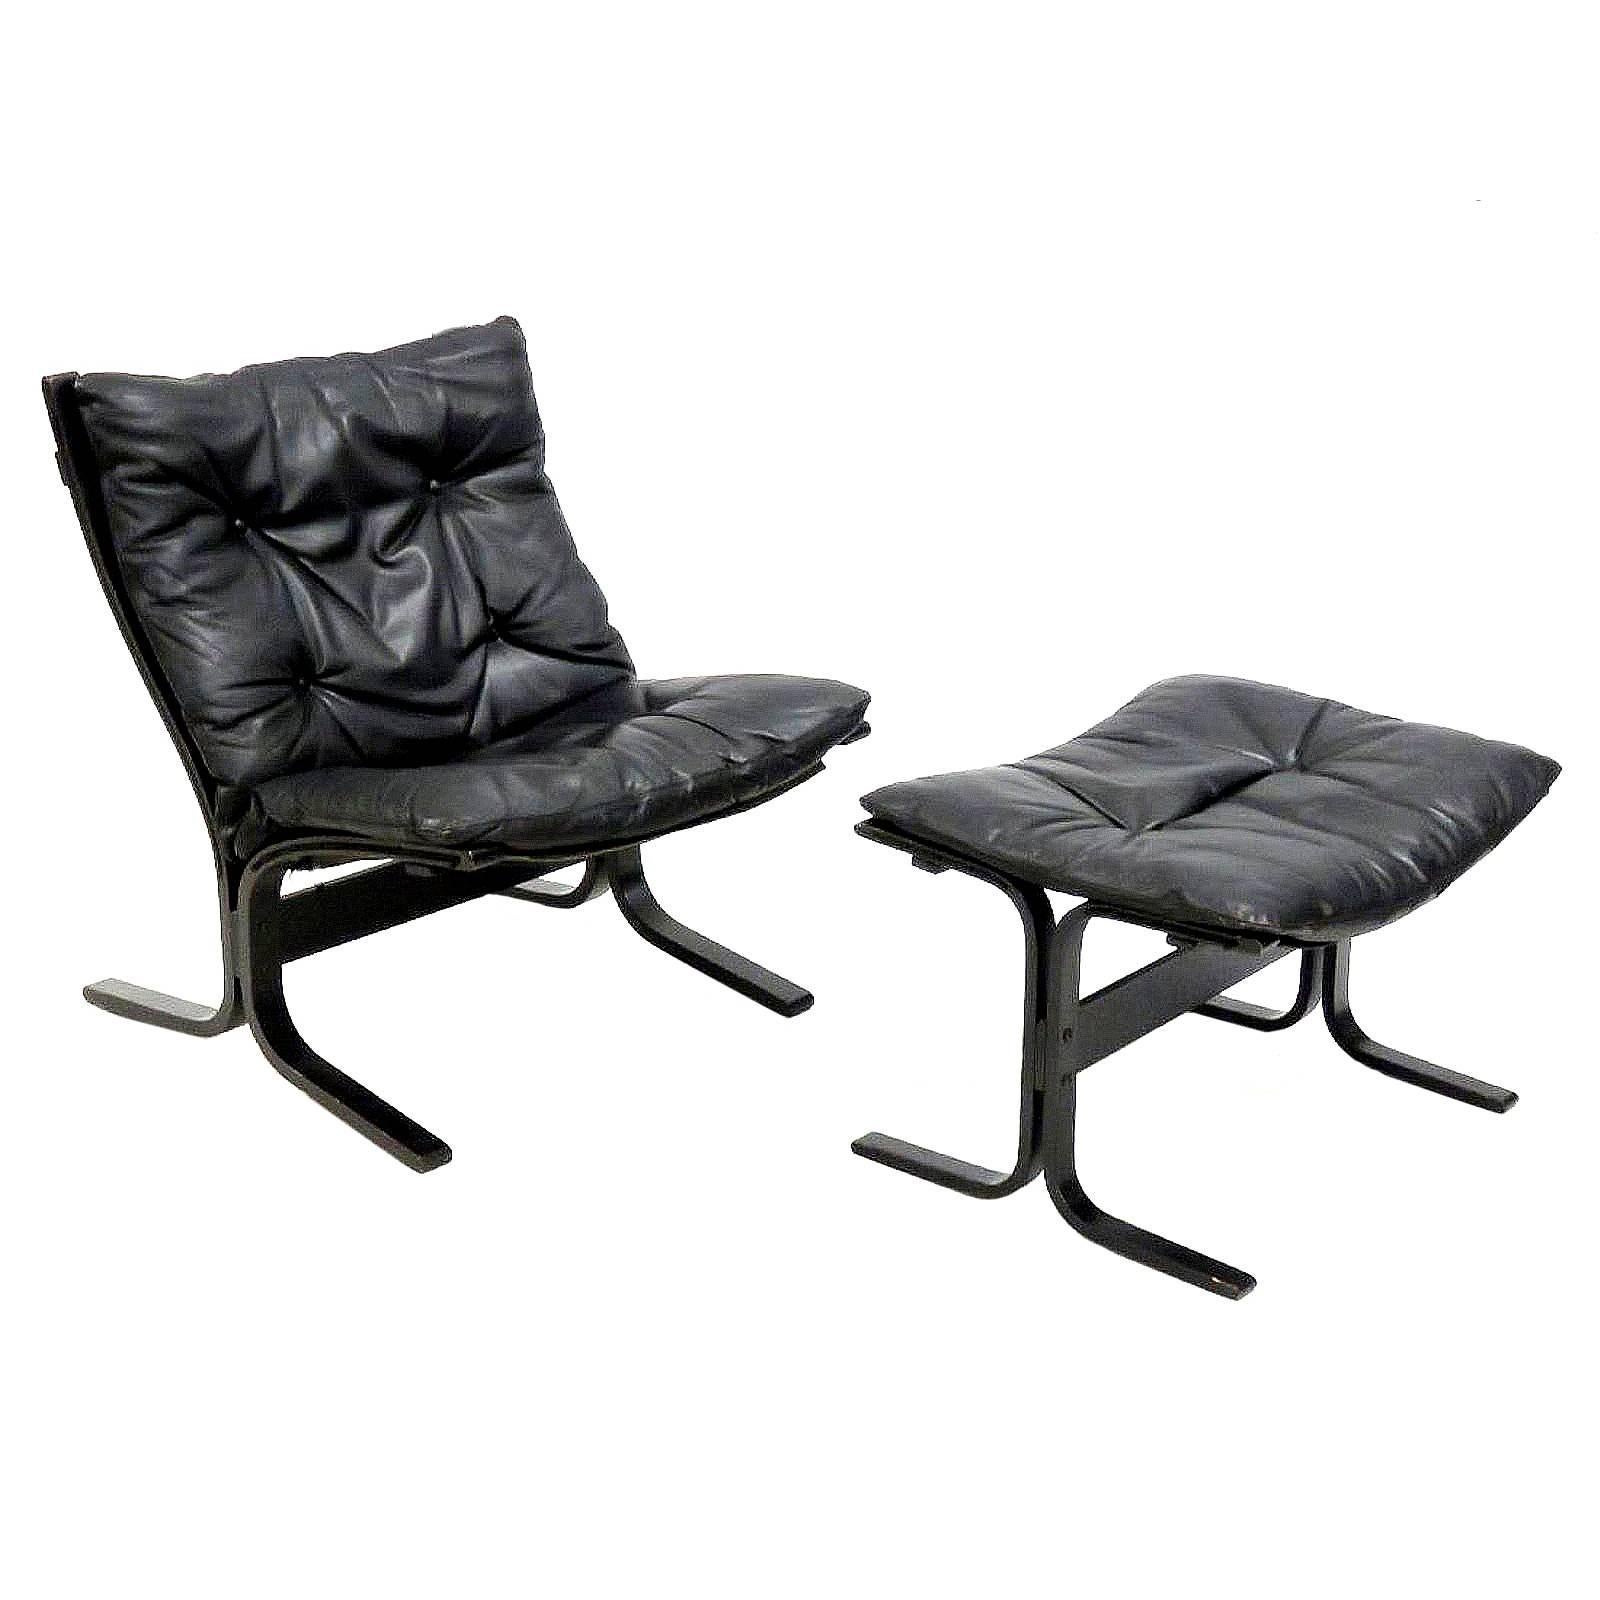 Siesta Chair and matching Ottoman by Ingmar Relling for Westnofa